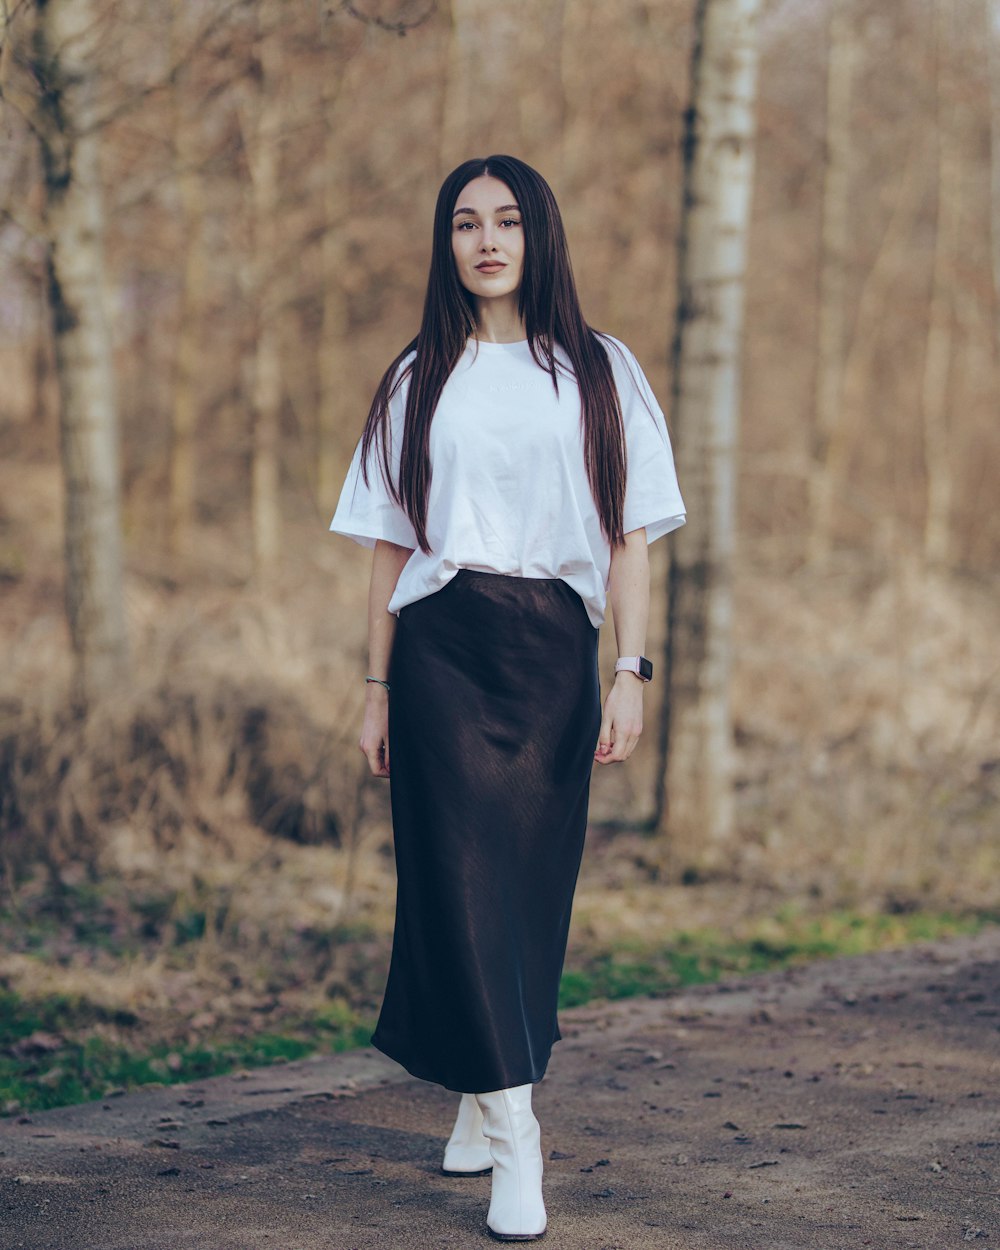 a woman with long hair wearing a white shirt and black skirt